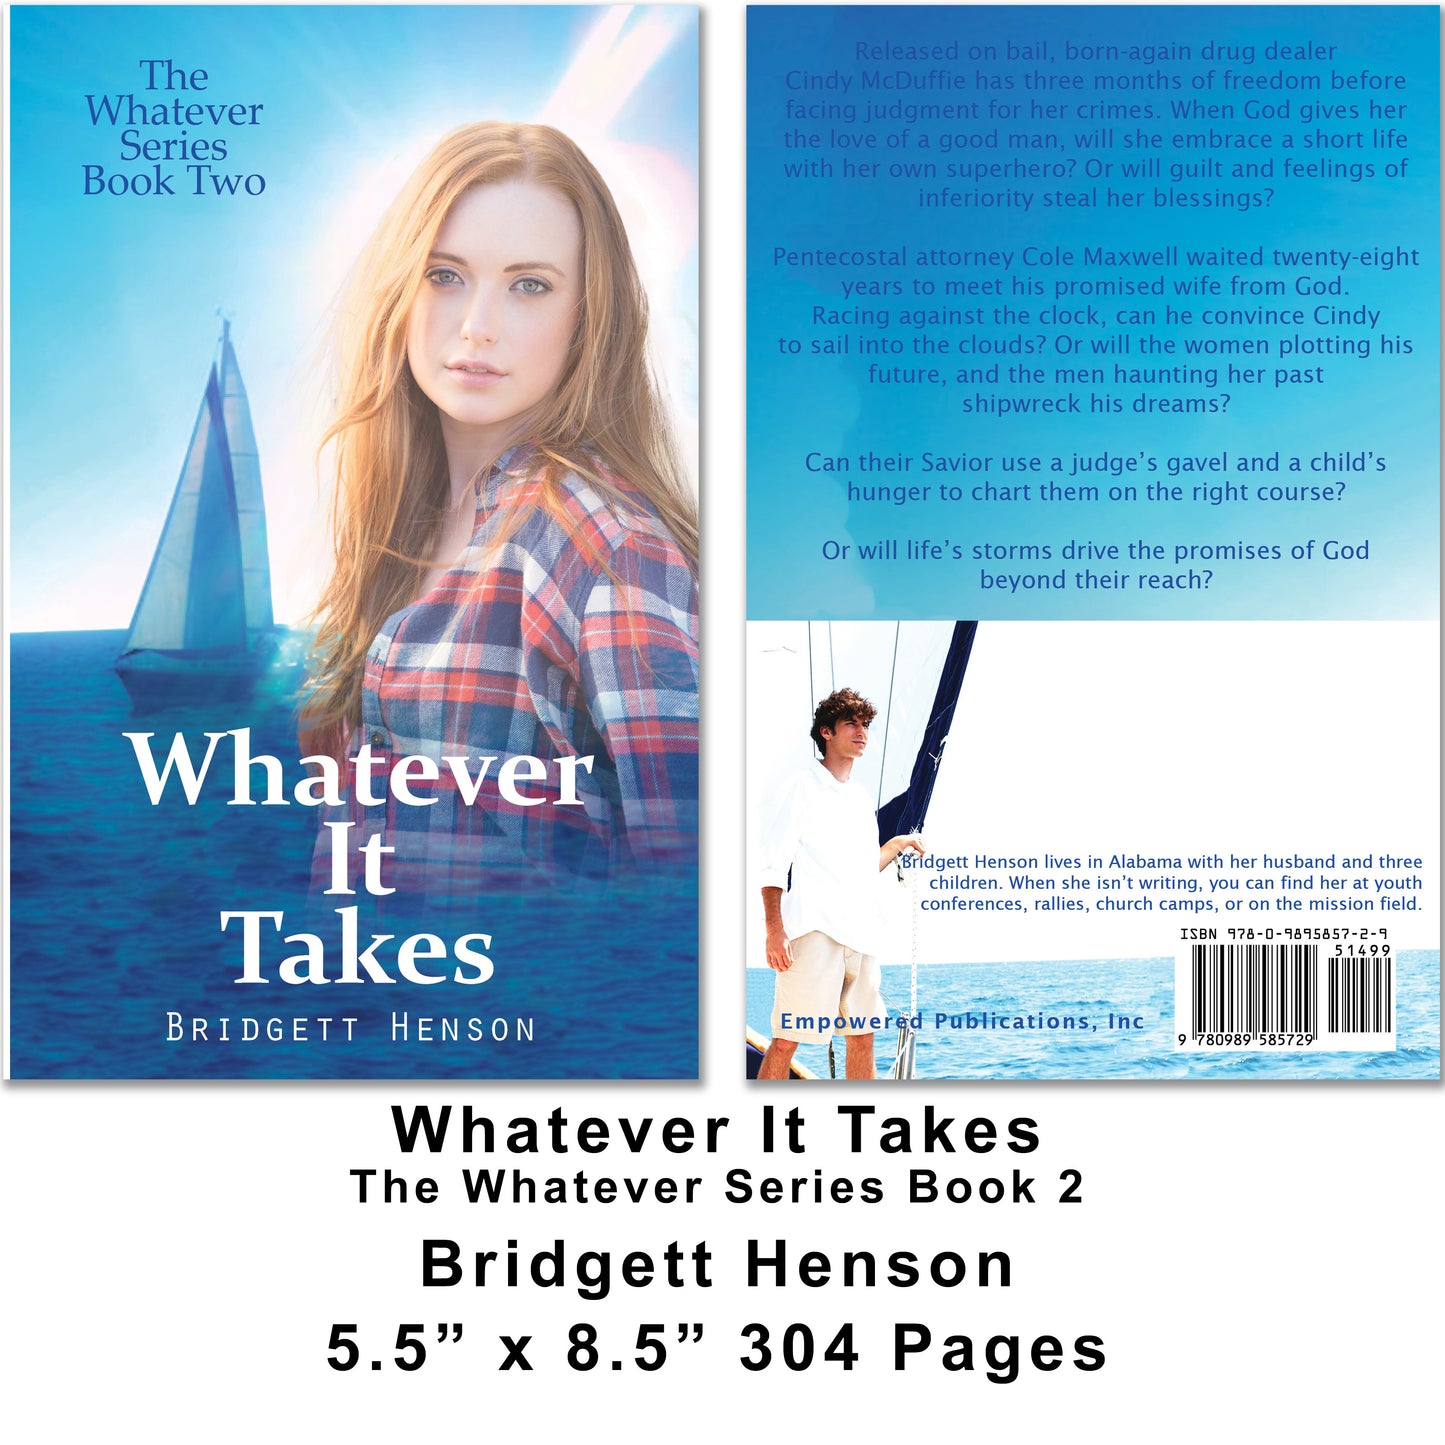 Whatever It Takes; The Whatever Series Book 2. She’s the promised wife of a godly attorney. She’s also a born-again drug dealer. 